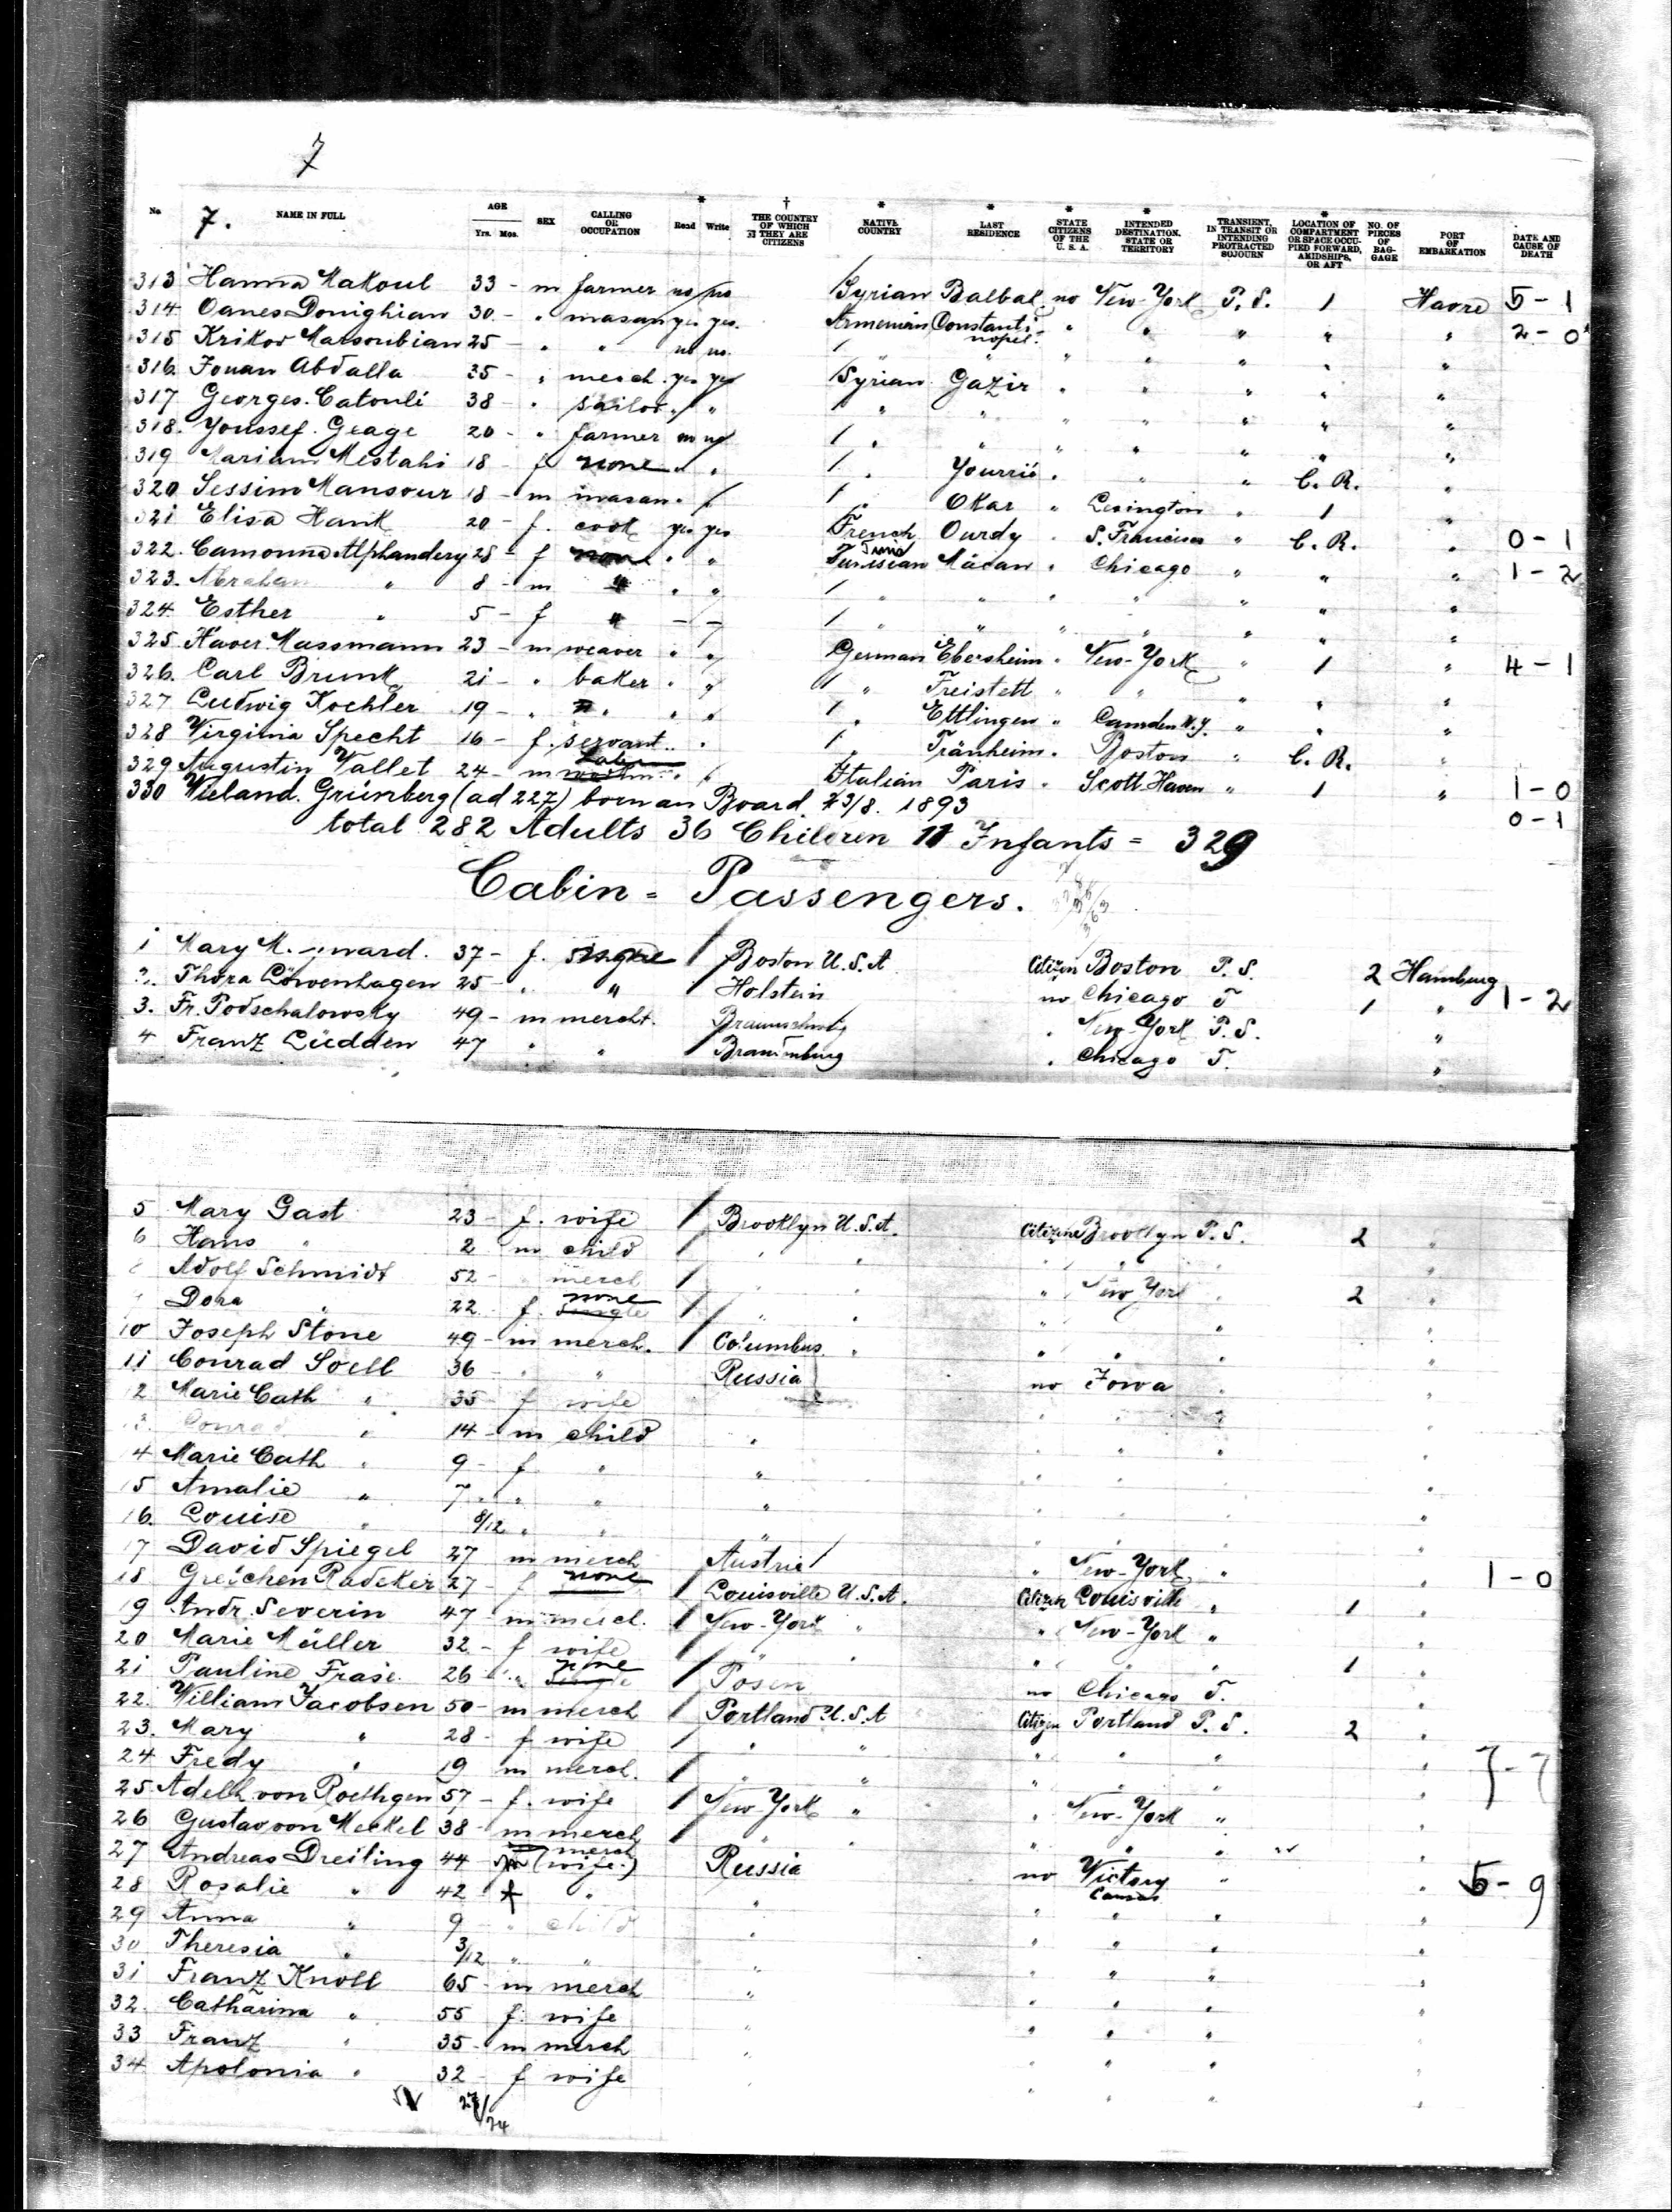 Passengers' list, including the Franz and Catharina Knoll family